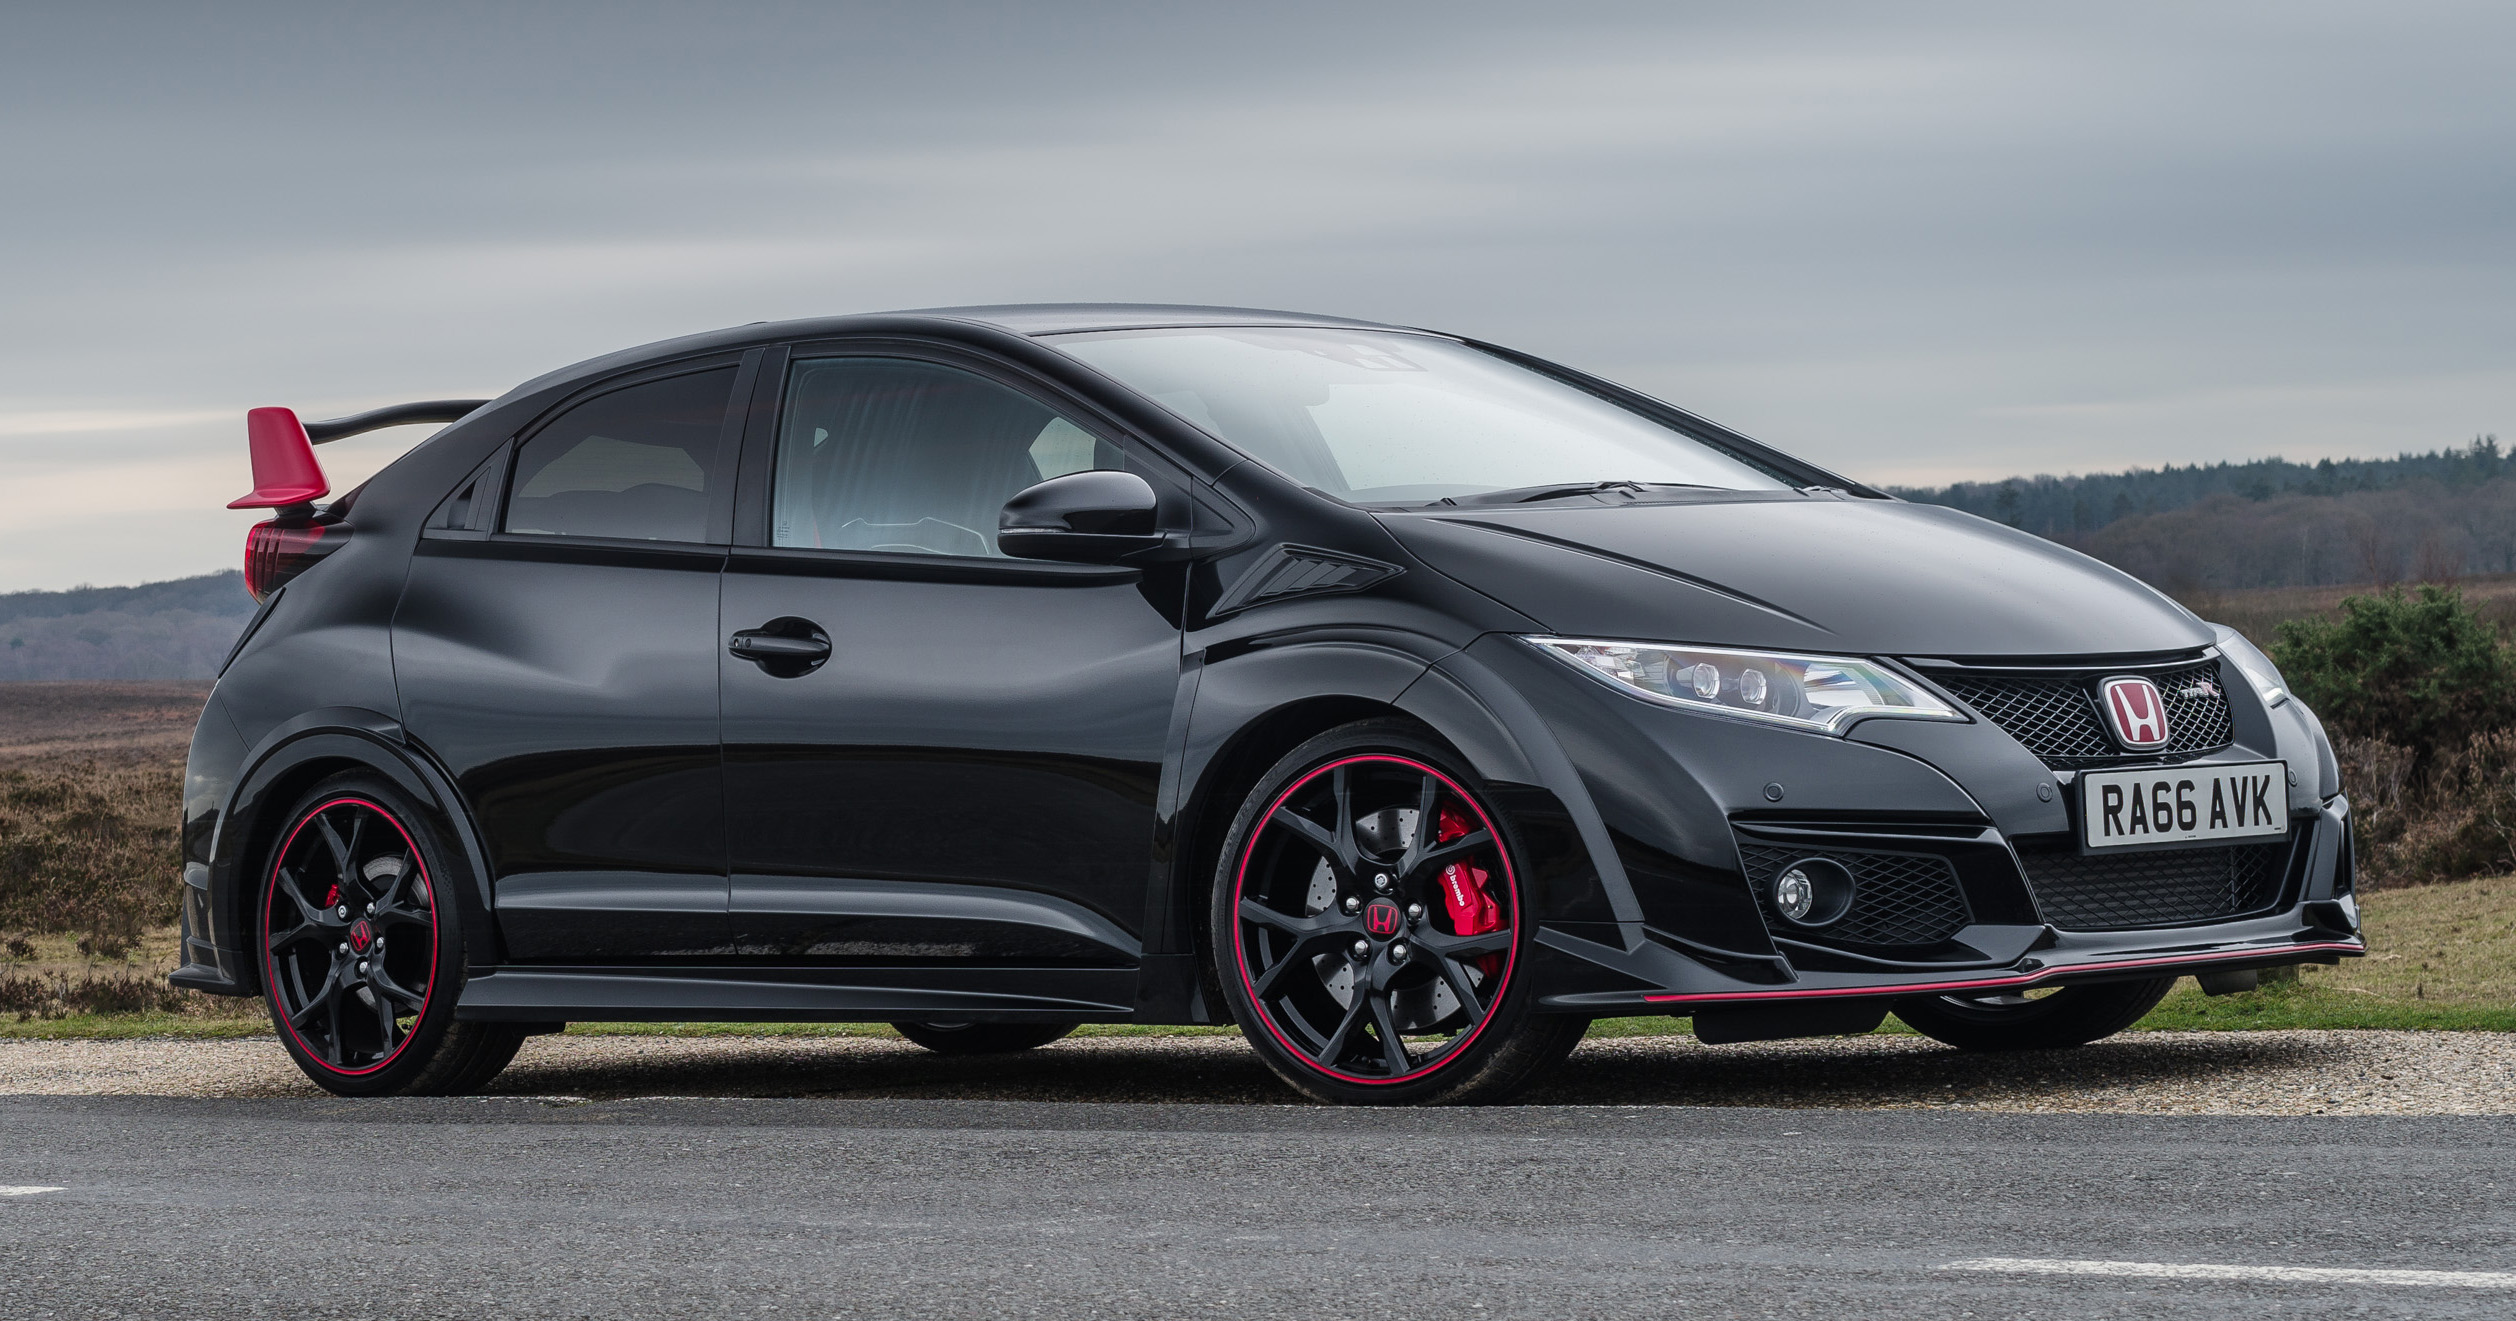 Honda Civic Type R Black Edition launched - only 100